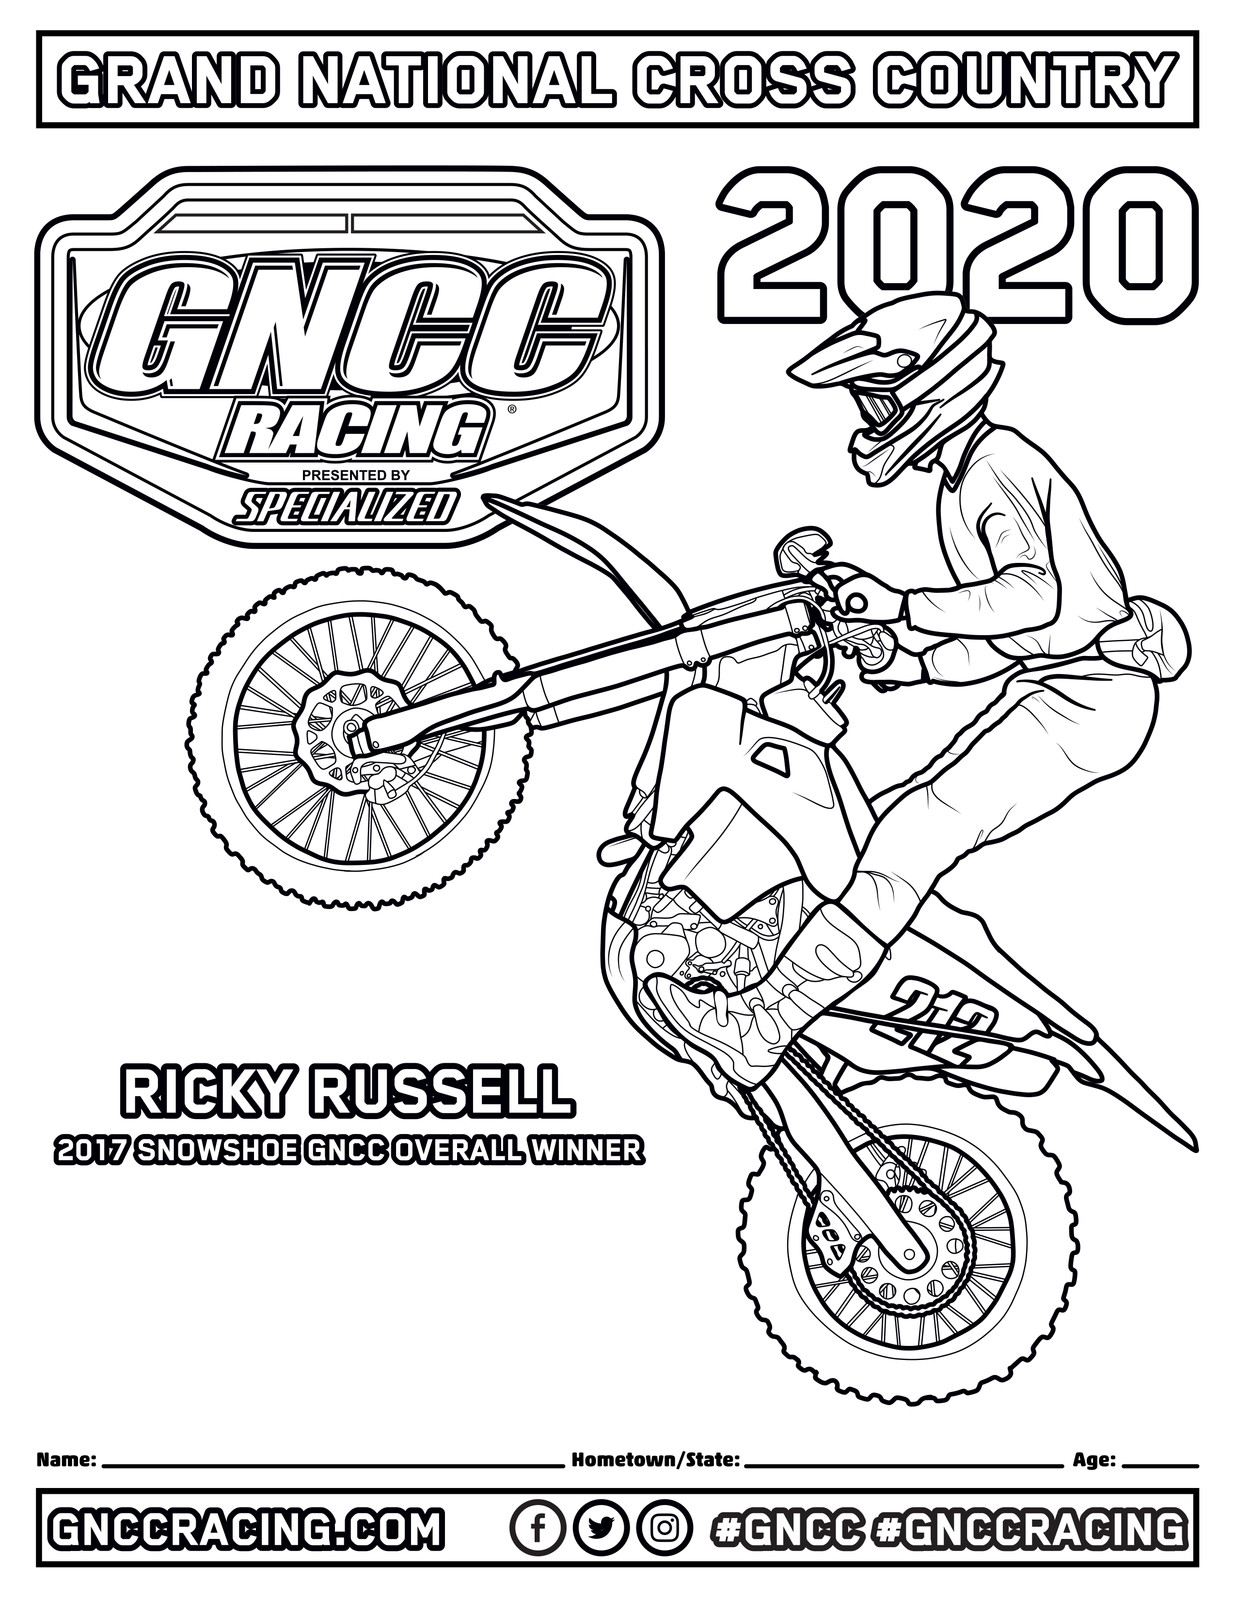 Fresh gncc coloring pages for your kids